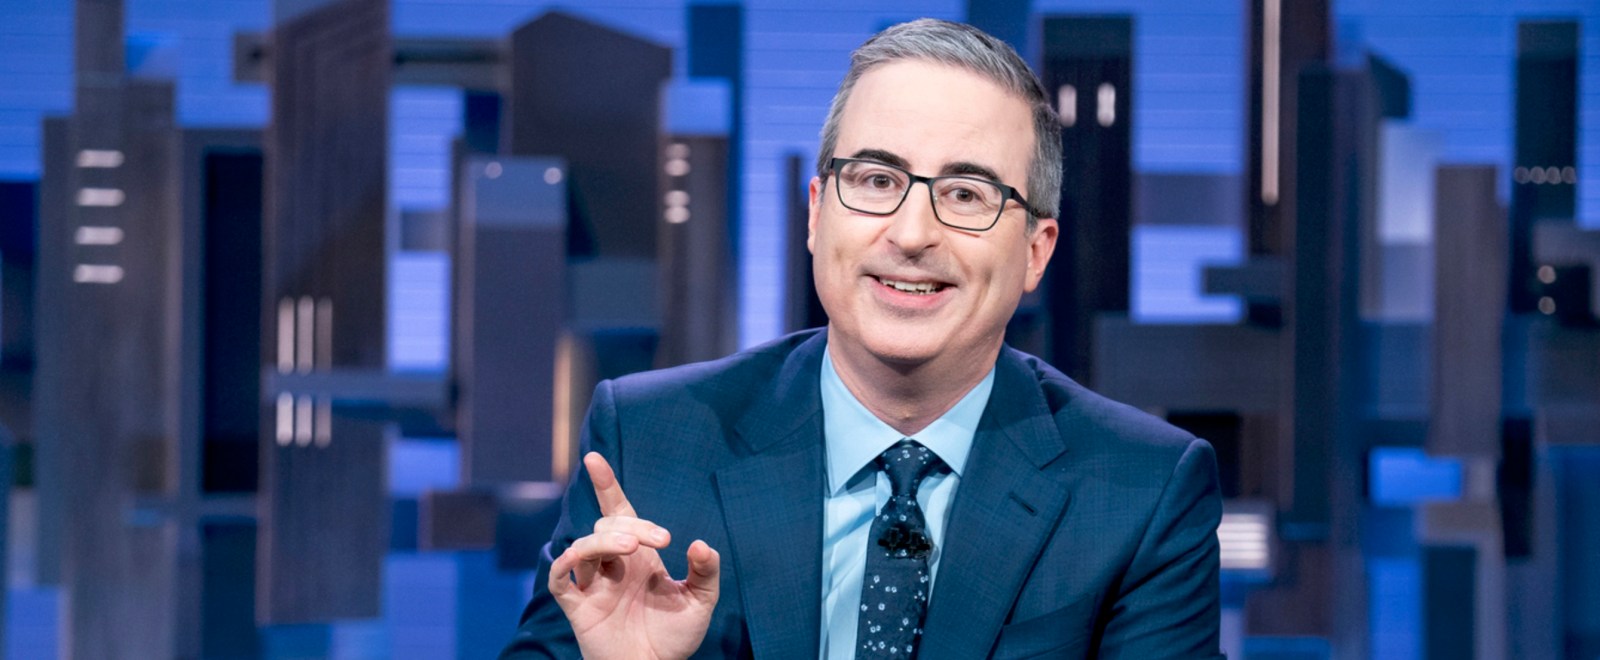 You’ll Have To Wait A Few Extra Days To Watch ‘Last Week Tonight’ On YouTube From Now On